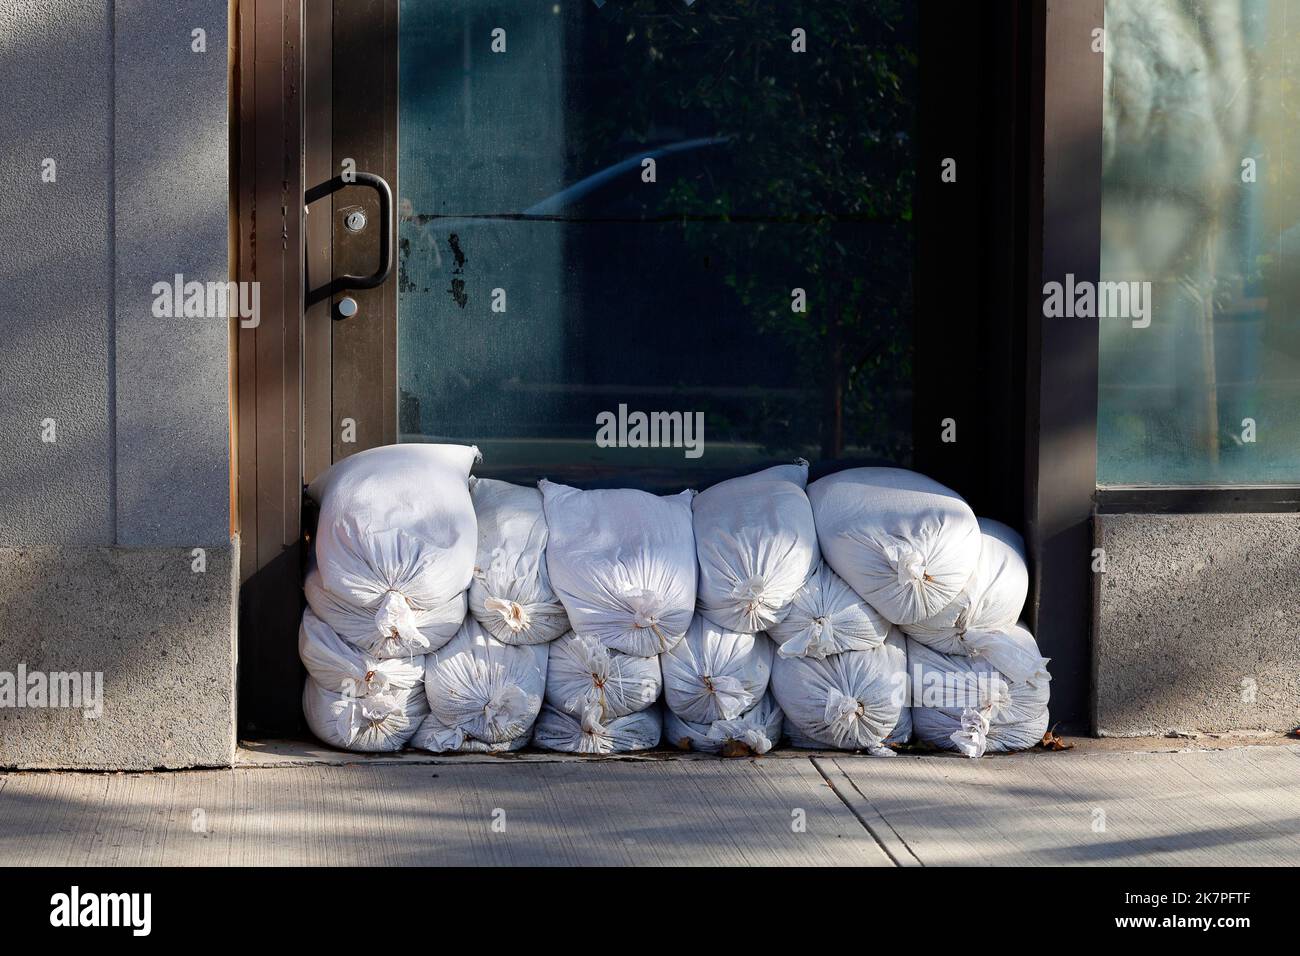 A pile of sandbags piled against a door as a flood prevention measure. Stock Photo